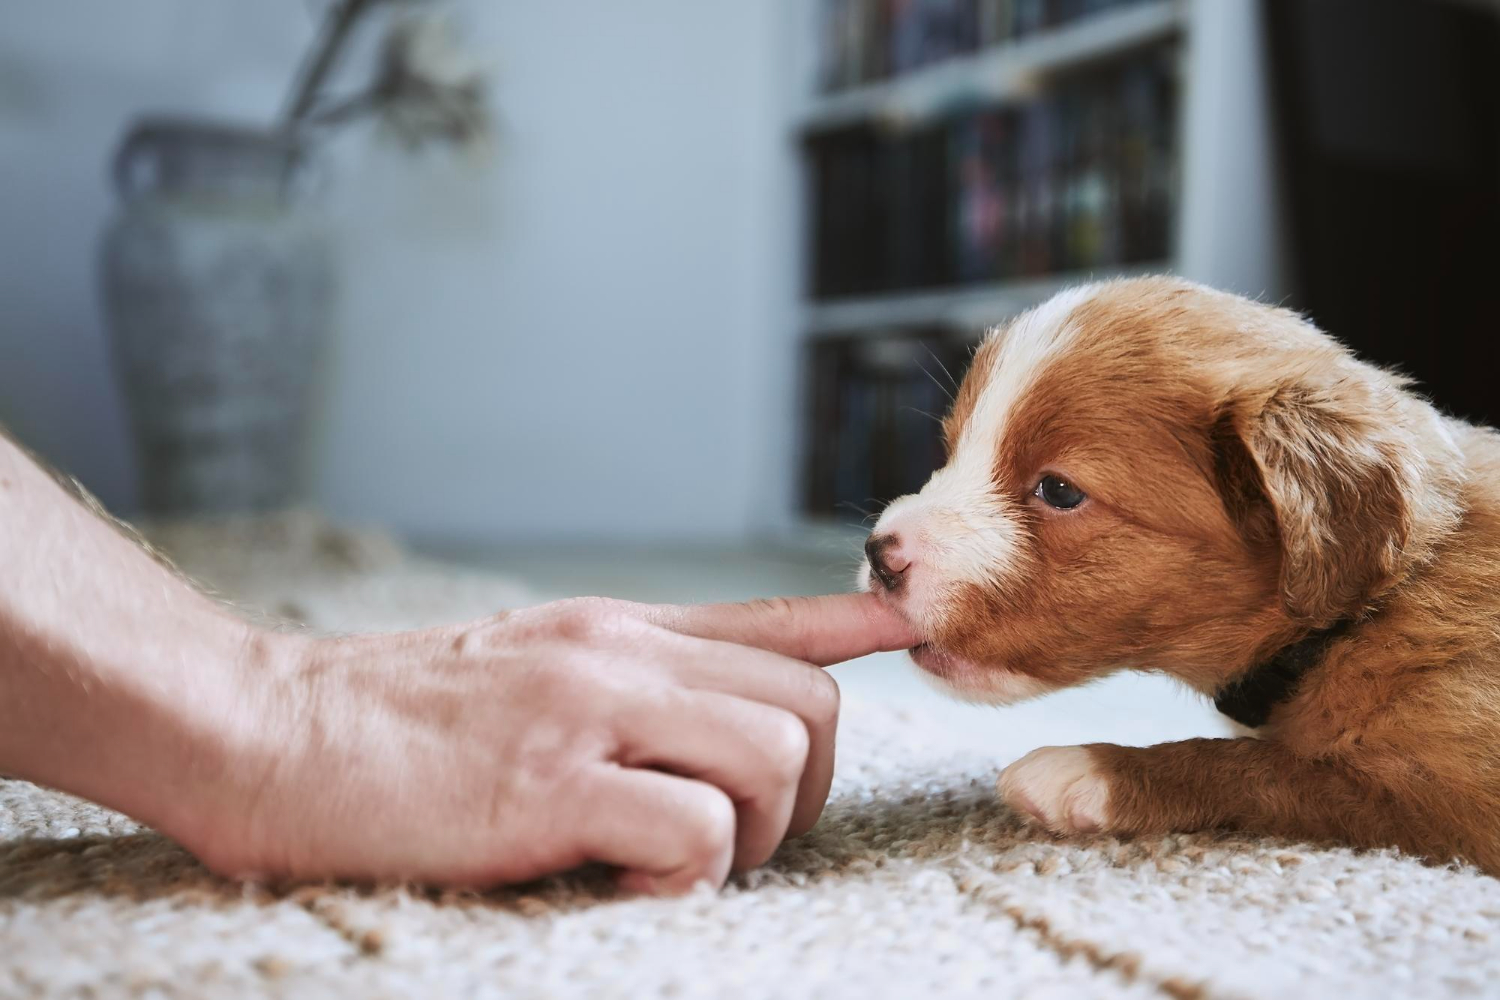 This is an image of a puppy chewing on a finger.